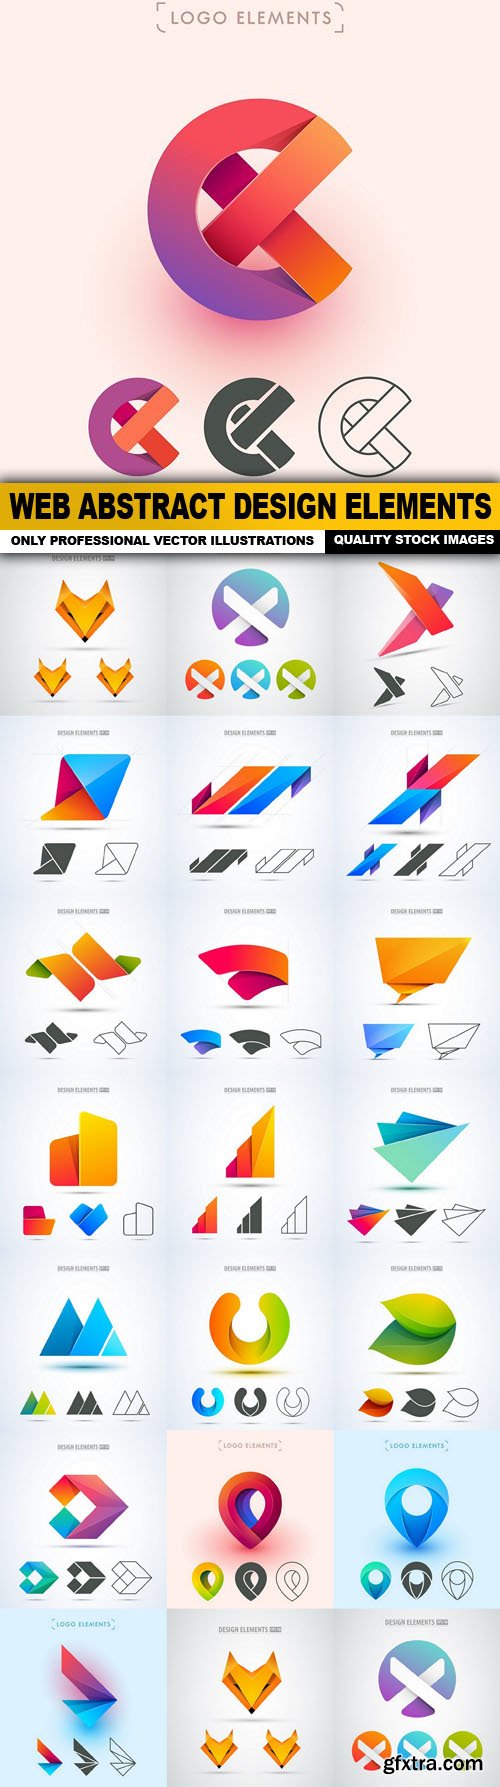 Web Abstract Design Elements - 20 Vector